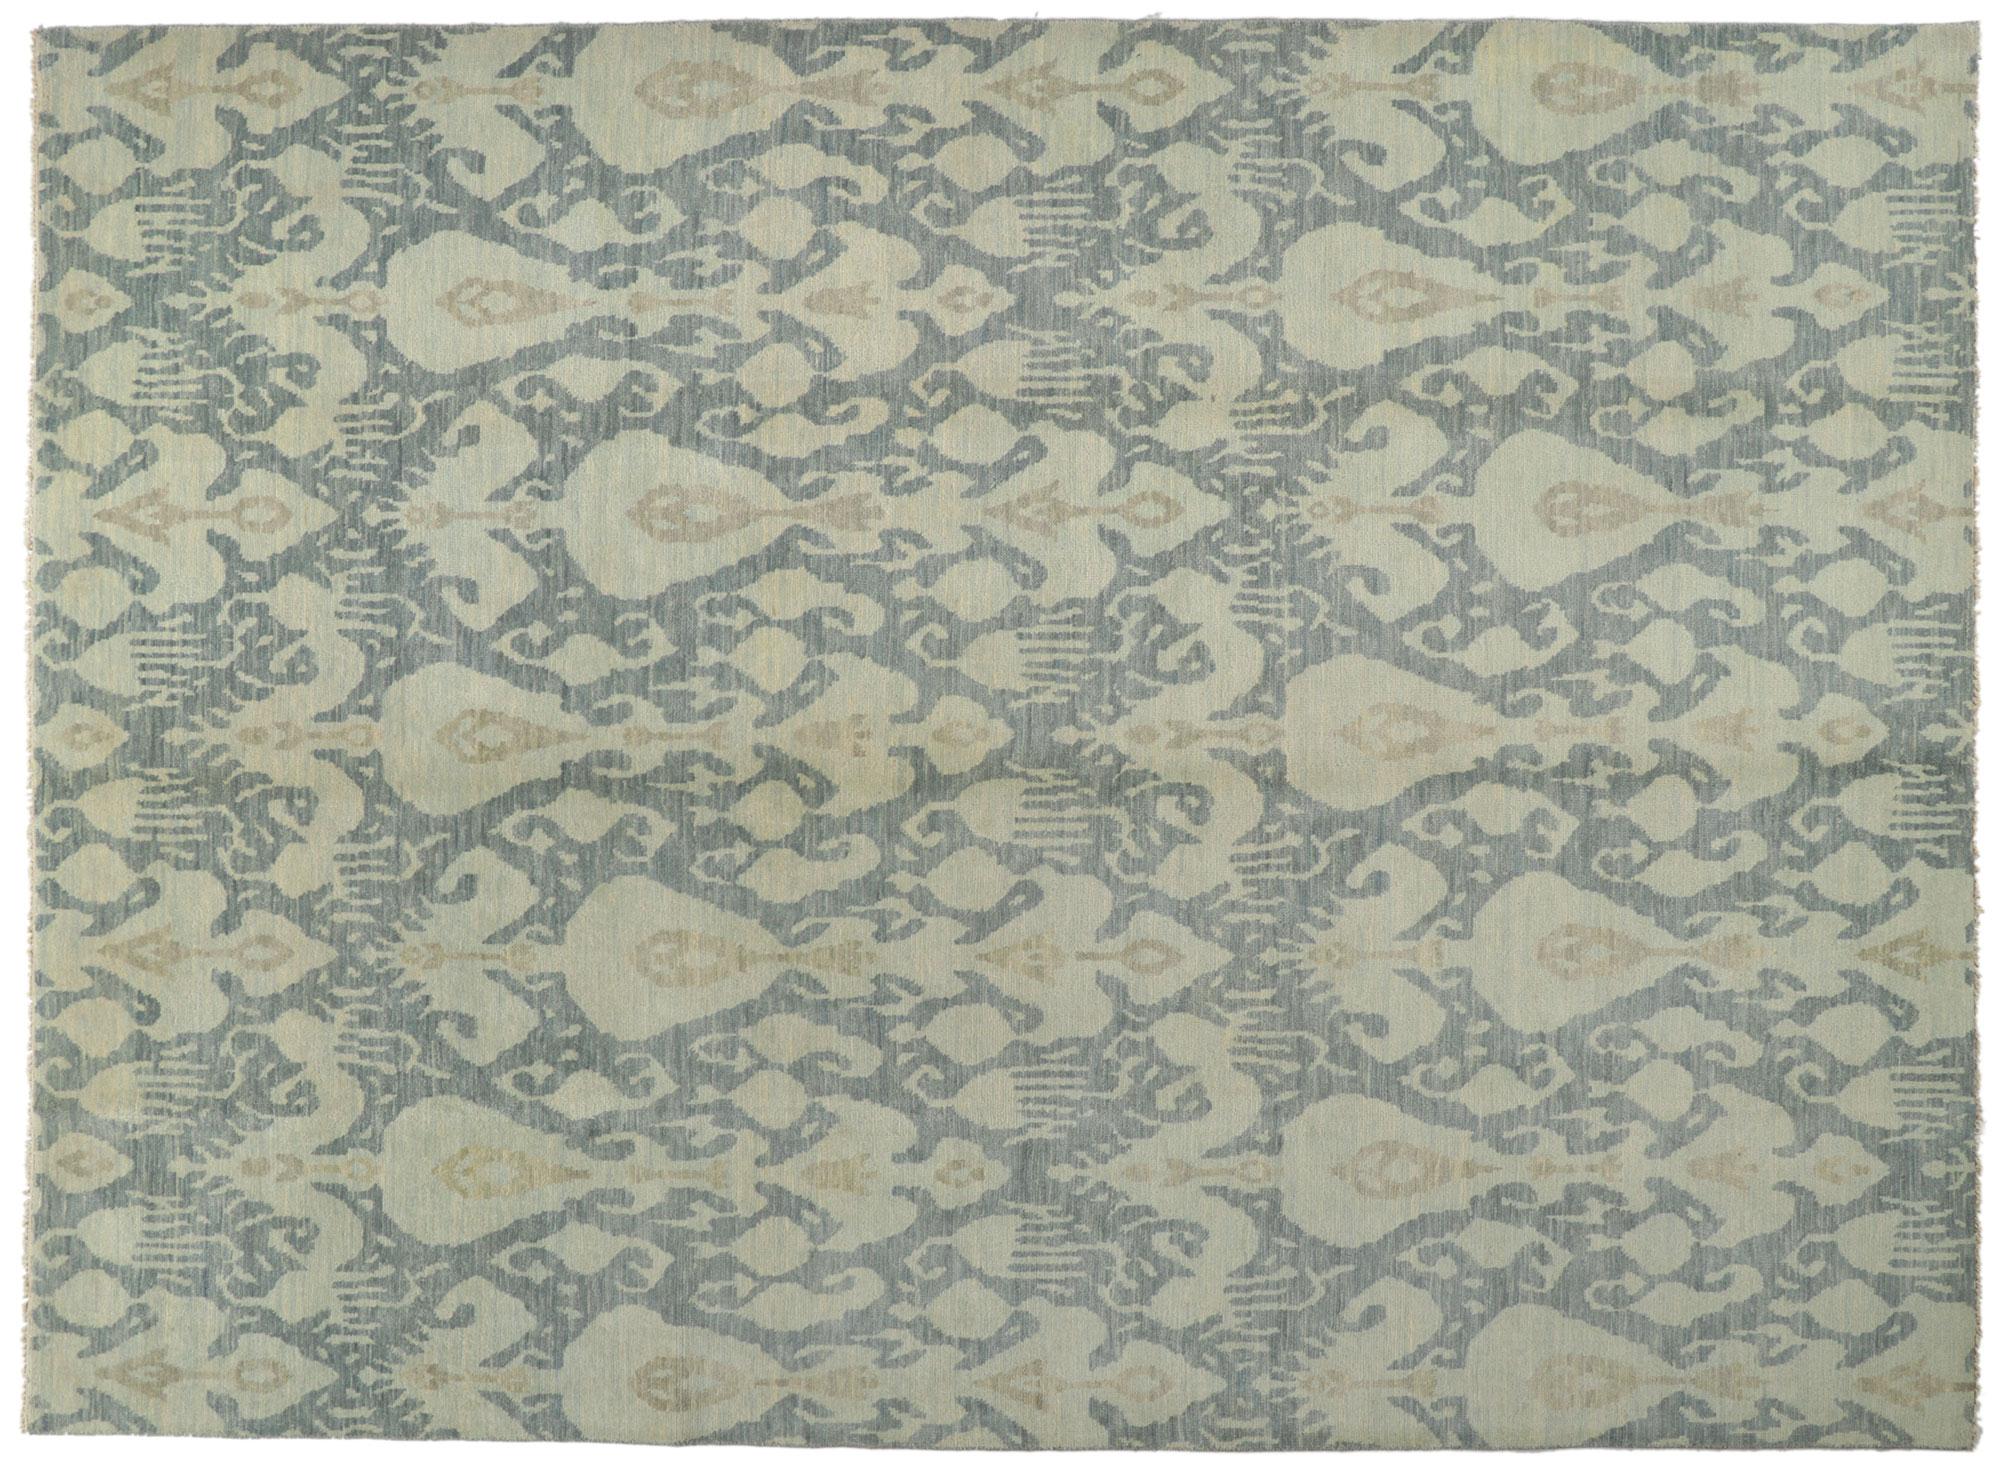 Wool New Transitional Area Rug with Ikat Pattern in Soft Blue Earth-Tone Colors For Sale